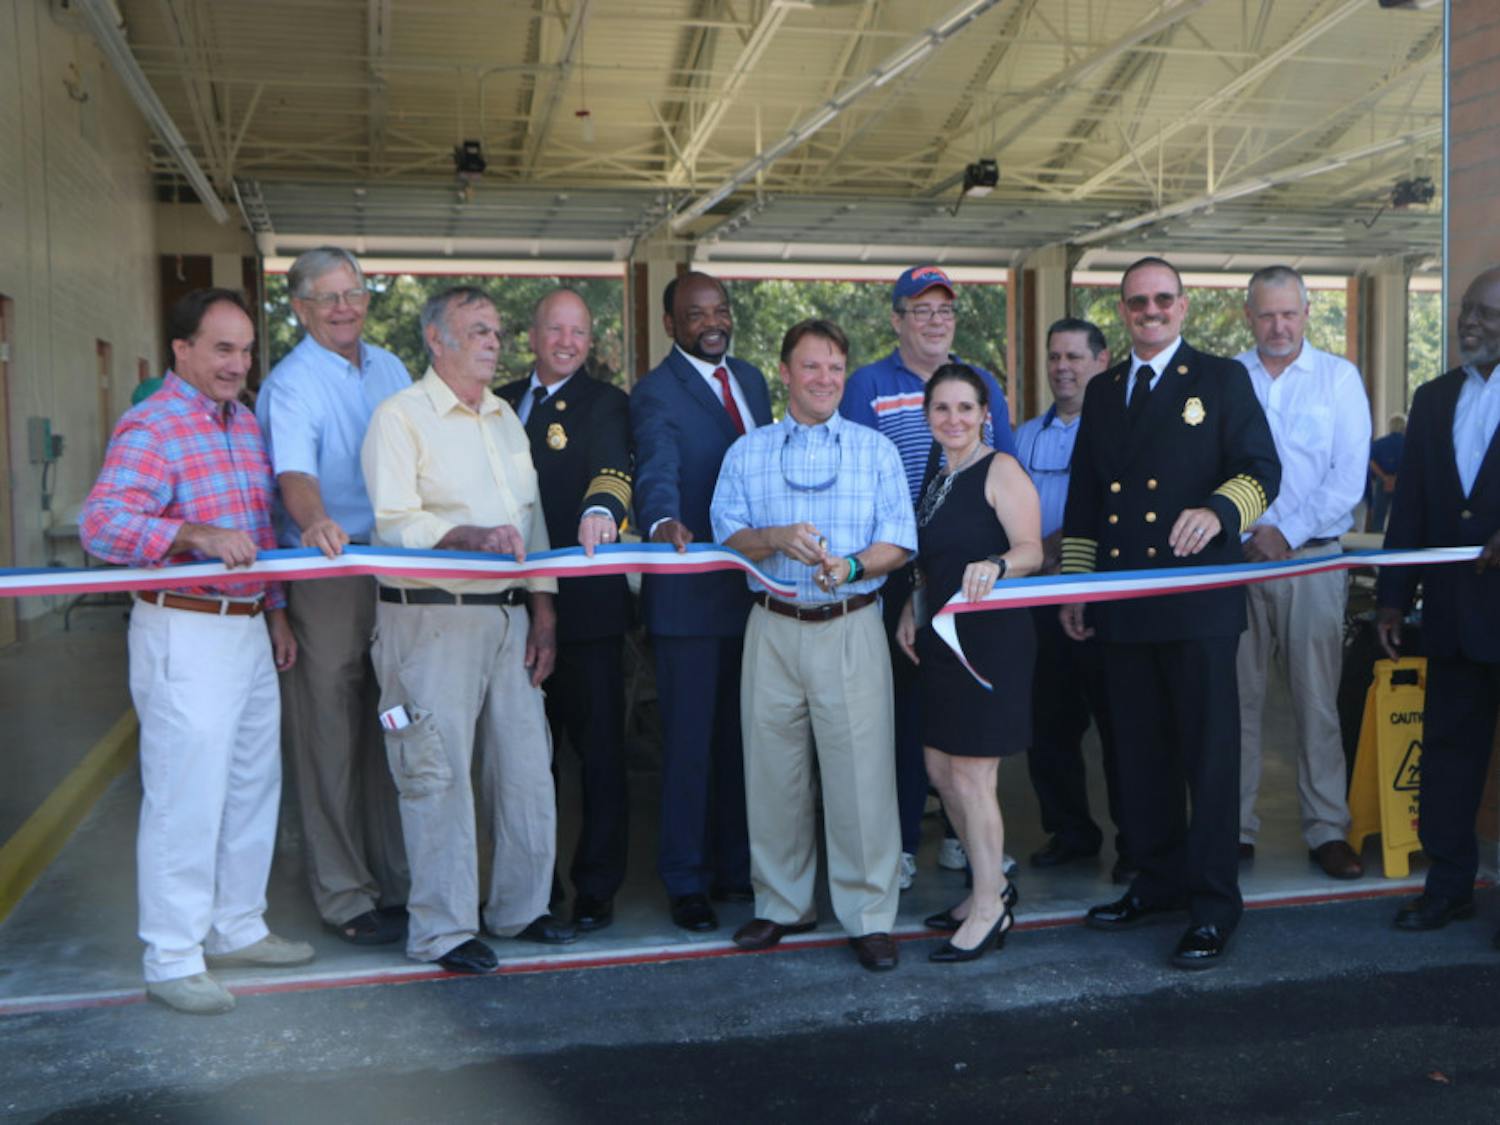 Alachua County Commissioner Ken Cornell cuts the ribbon in front of the new Fire Rescue Station 33, located at 5901 NW 34th Blvd., on Friday. The station will house six ambulances.